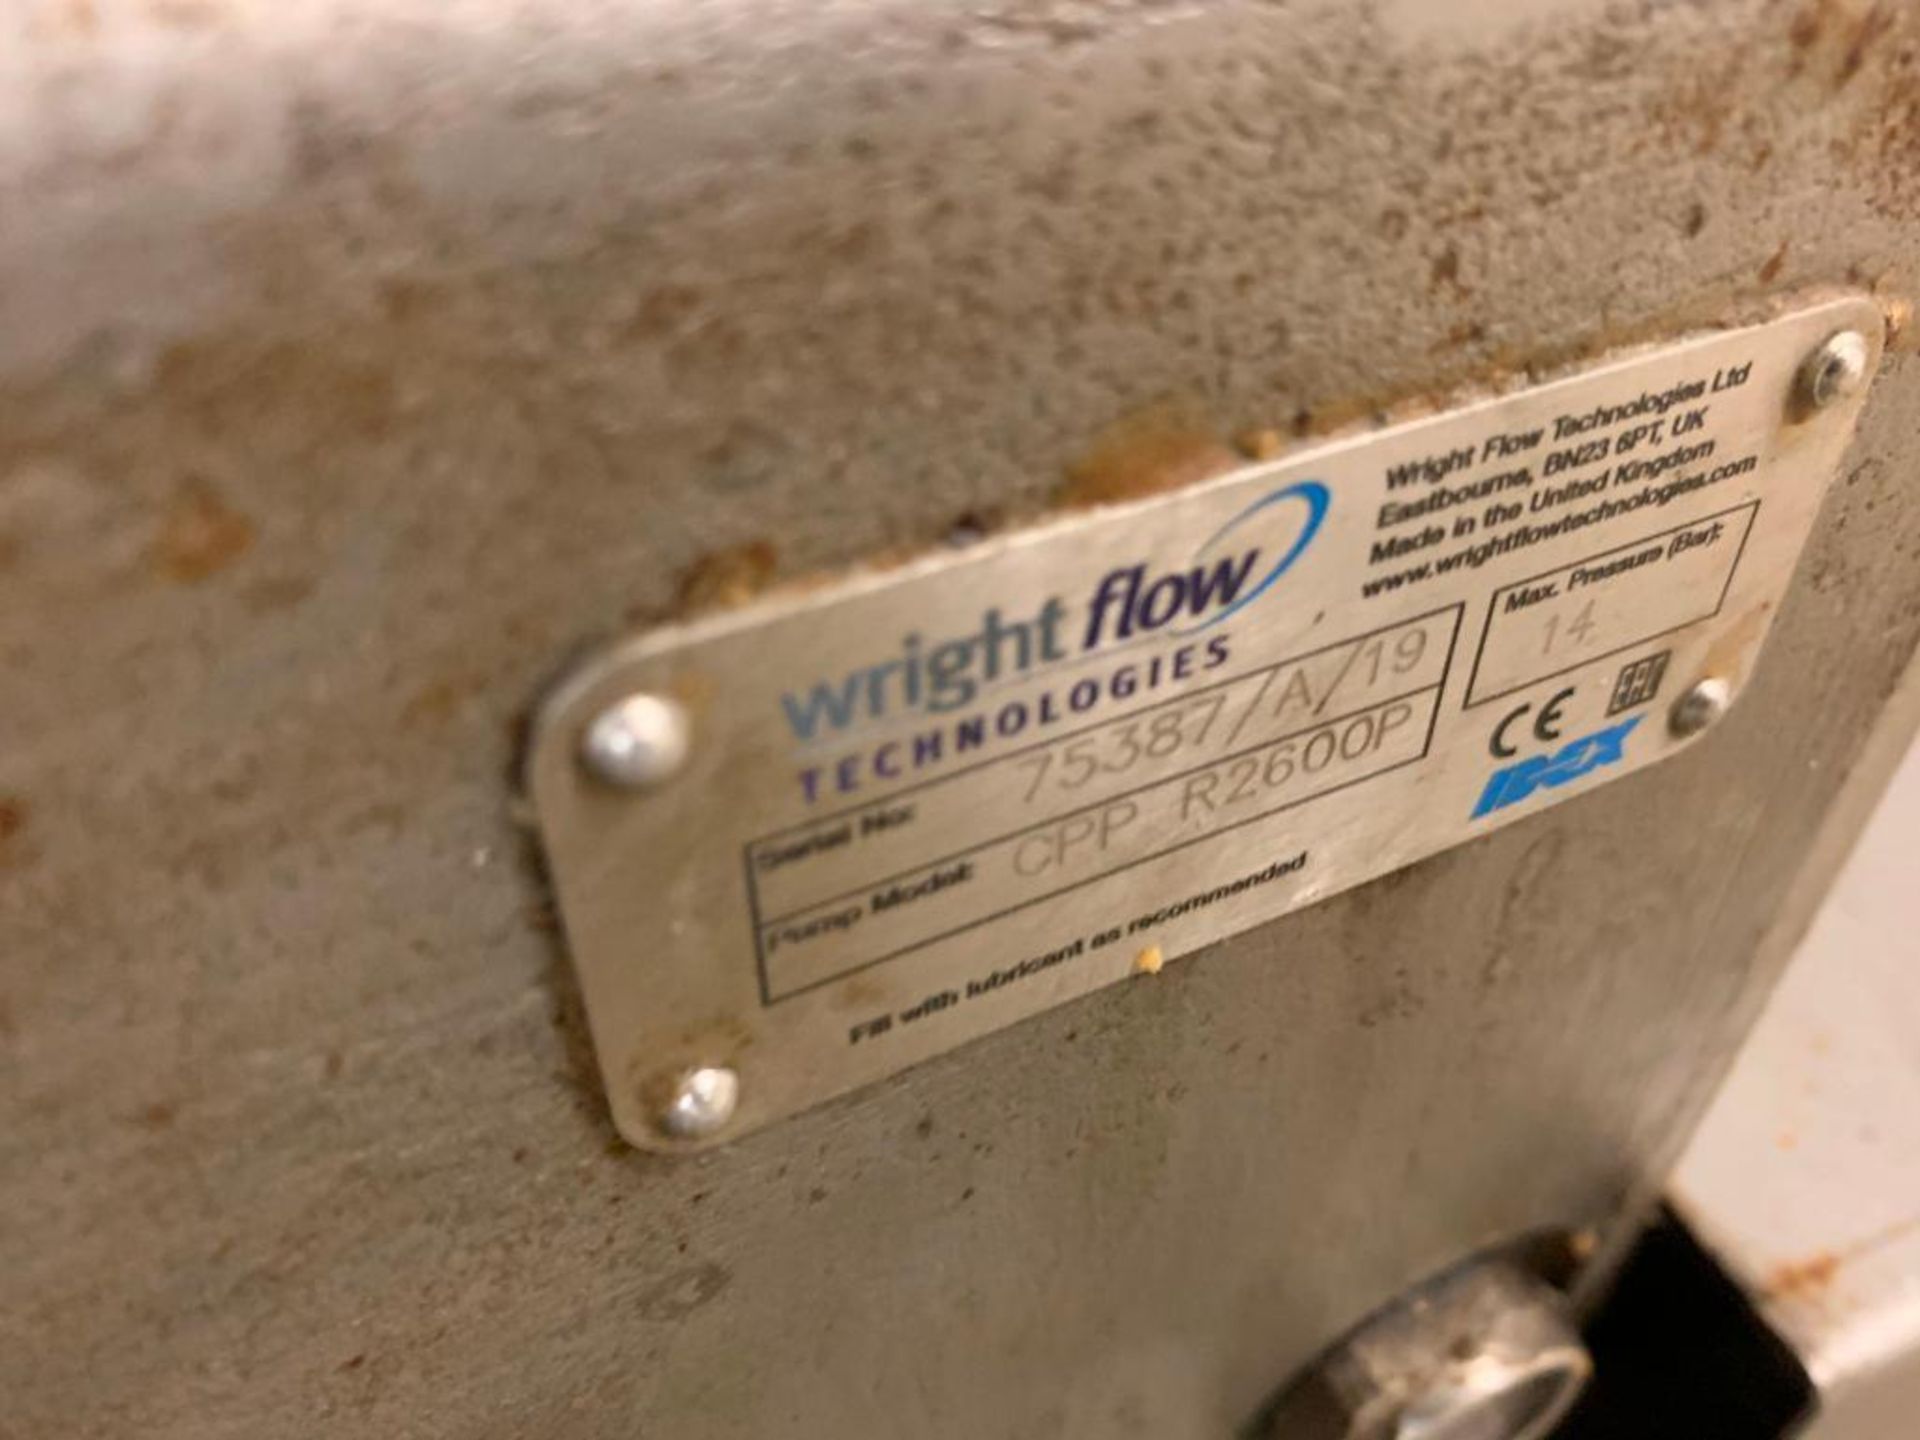 Wright Flow PD pump model CPP_R2600P, 4 in. sanitary fittings SS 10 hp motor - Located in Tifton, GA - Image 5 of 21